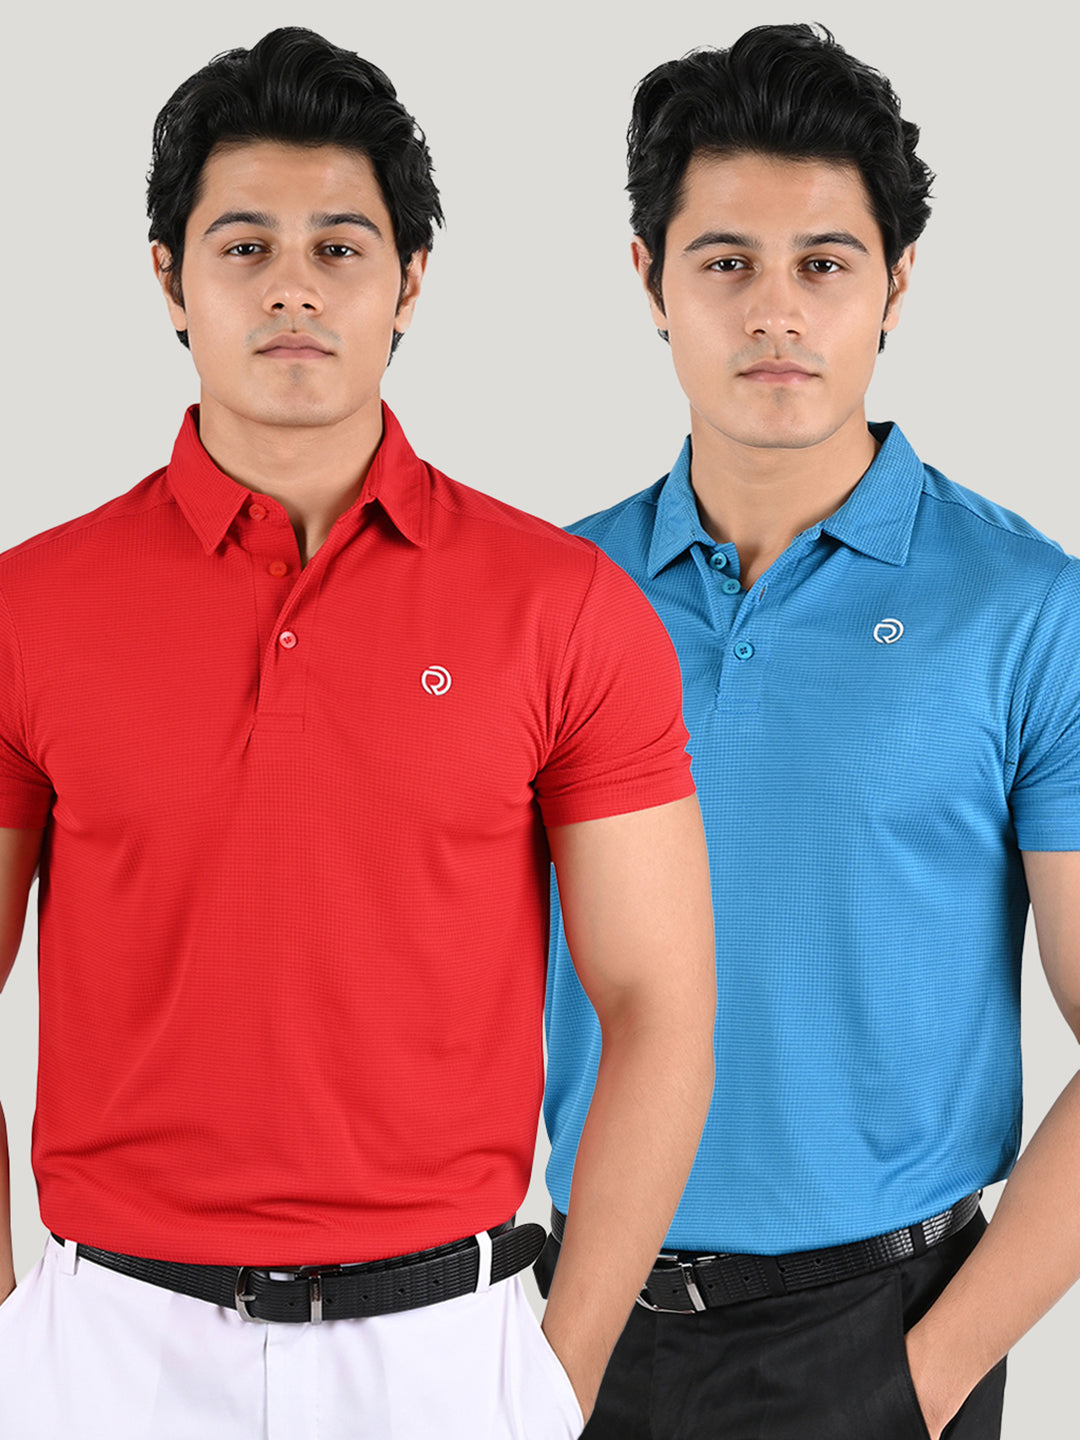 Performance Sports Collar Tshirt - Pack of 2 Red & Blue